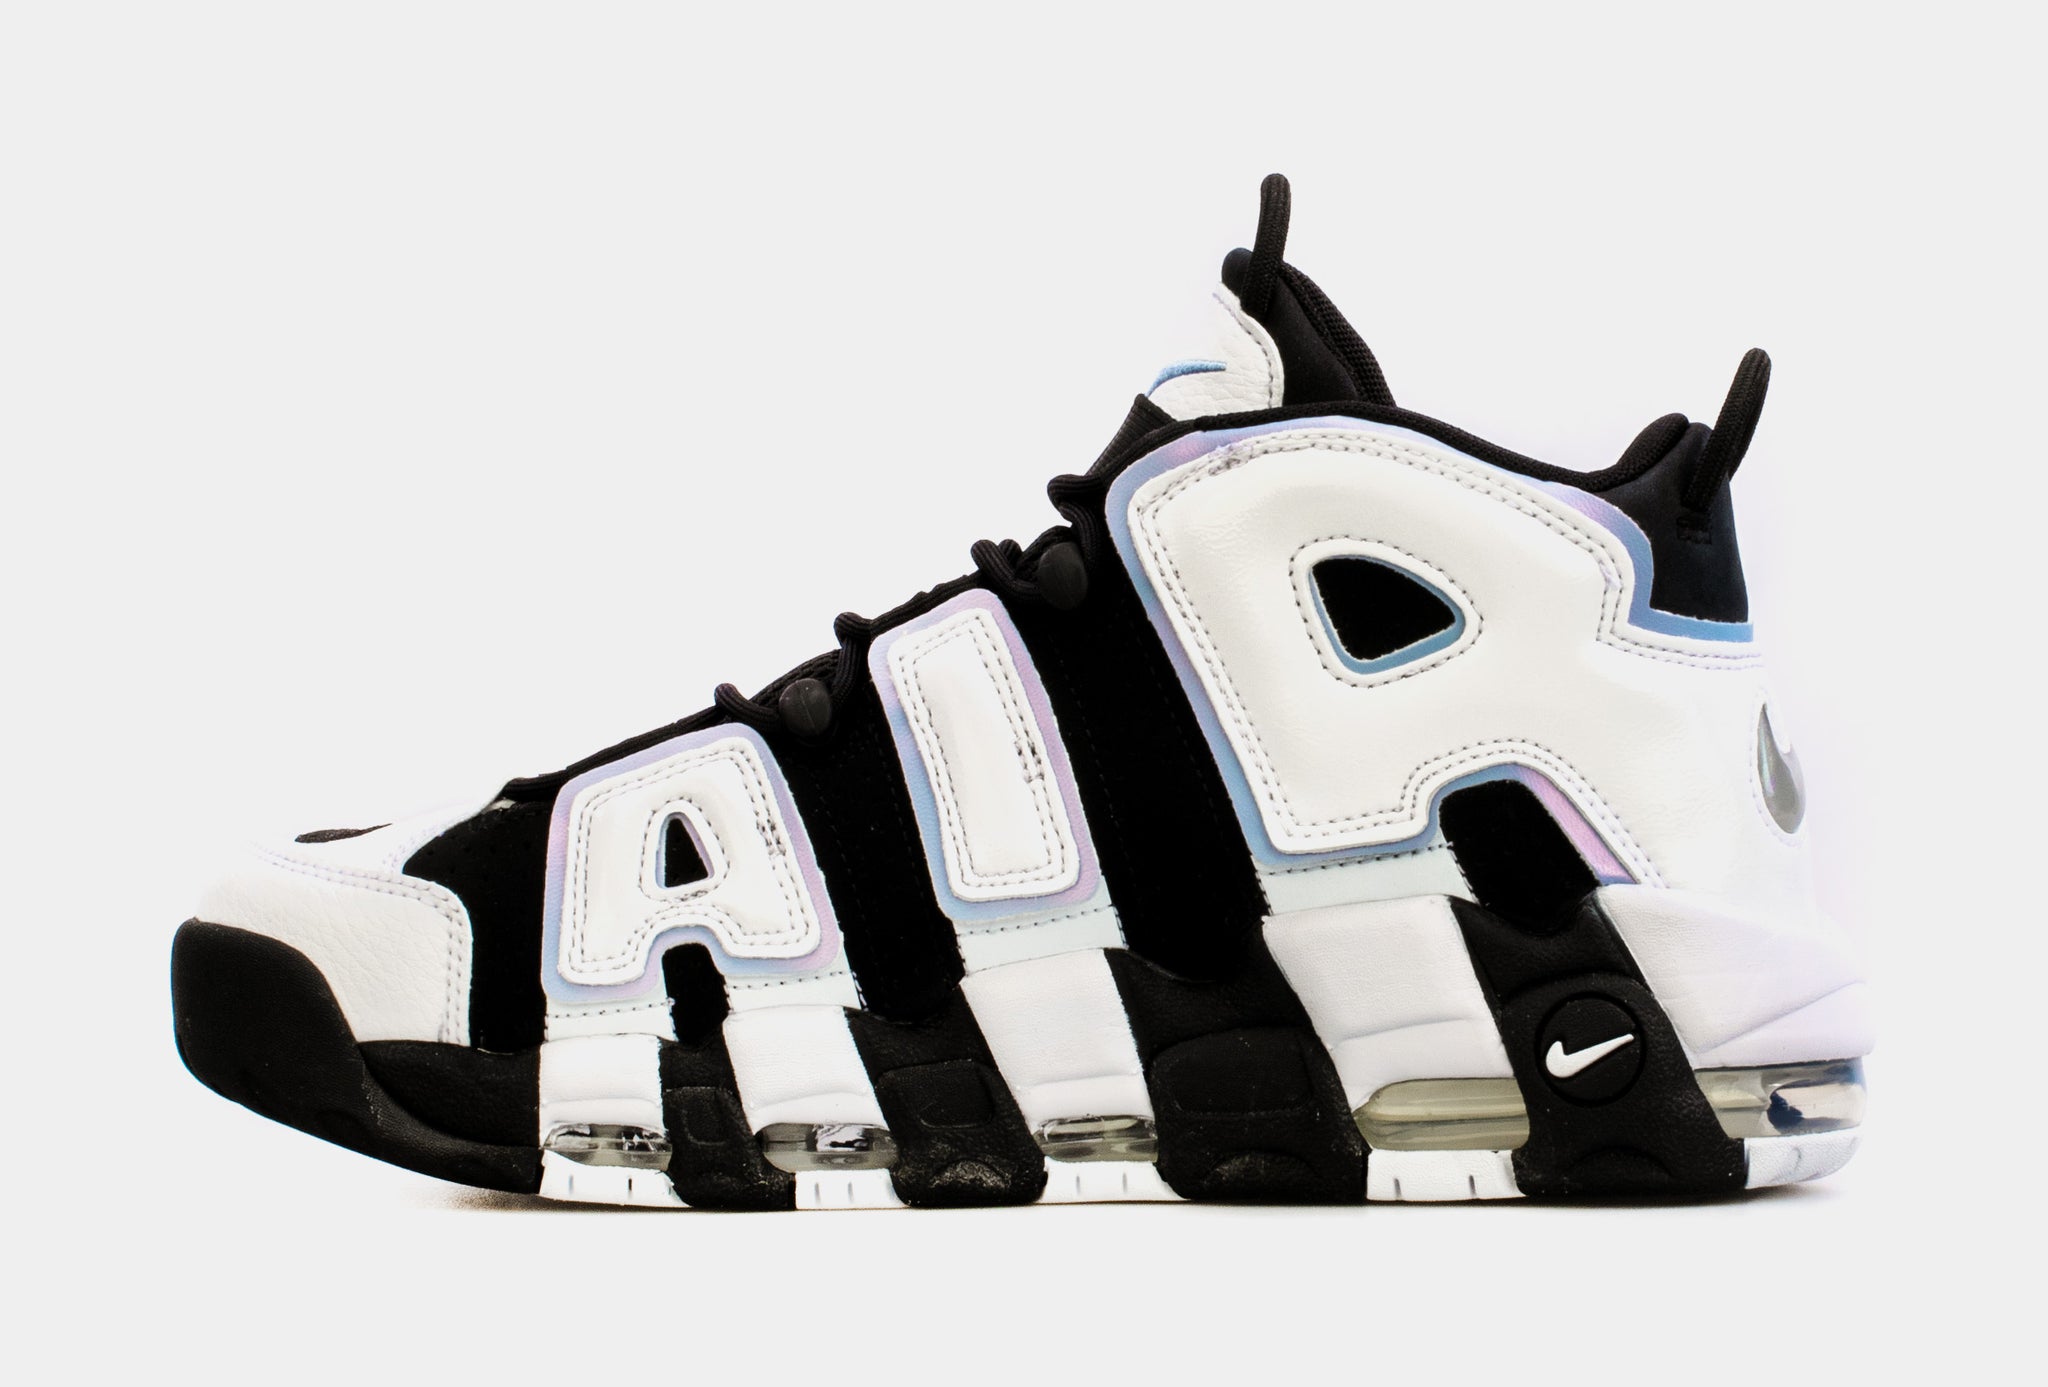 Nike Air More Uptempo '96 Men's Shoes.